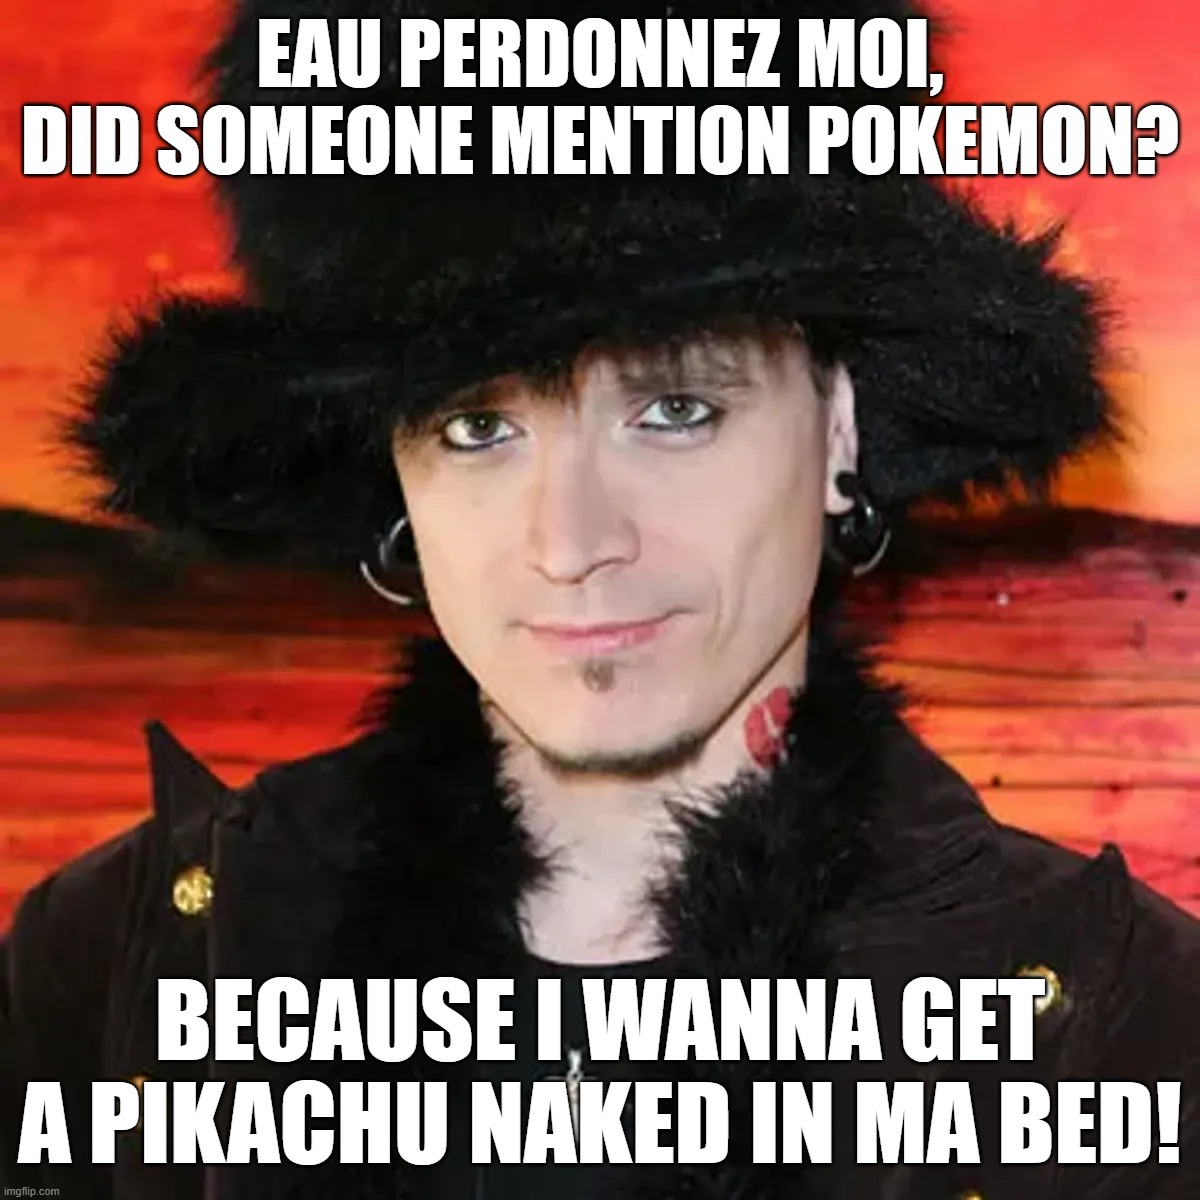 Pokemon Pick-Up Line | EAU PERDONNEZ MOI, DID SOMEONE MENTION POKEMON? BECAUSE I WANNA GET A PIKACHU NAKED IN MA BED! | image tagged in mystery,pick-up artist,pokemon | made w/ Imgflip meme maker